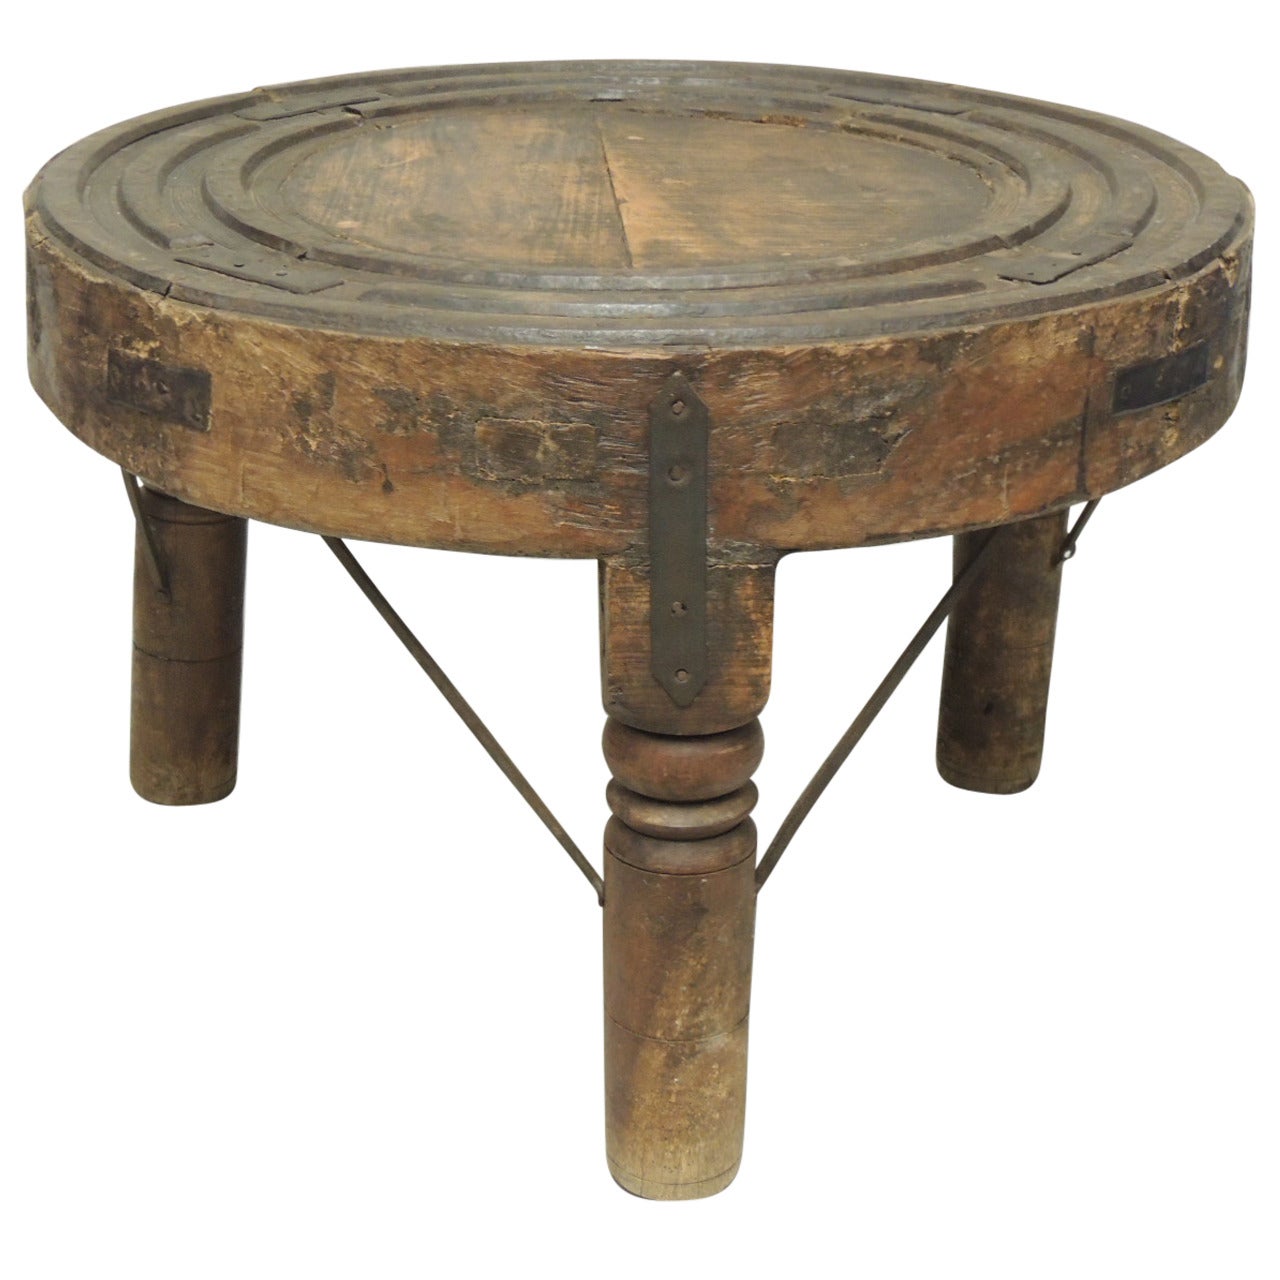 Round Indian Wheel Coffee/Side Table.